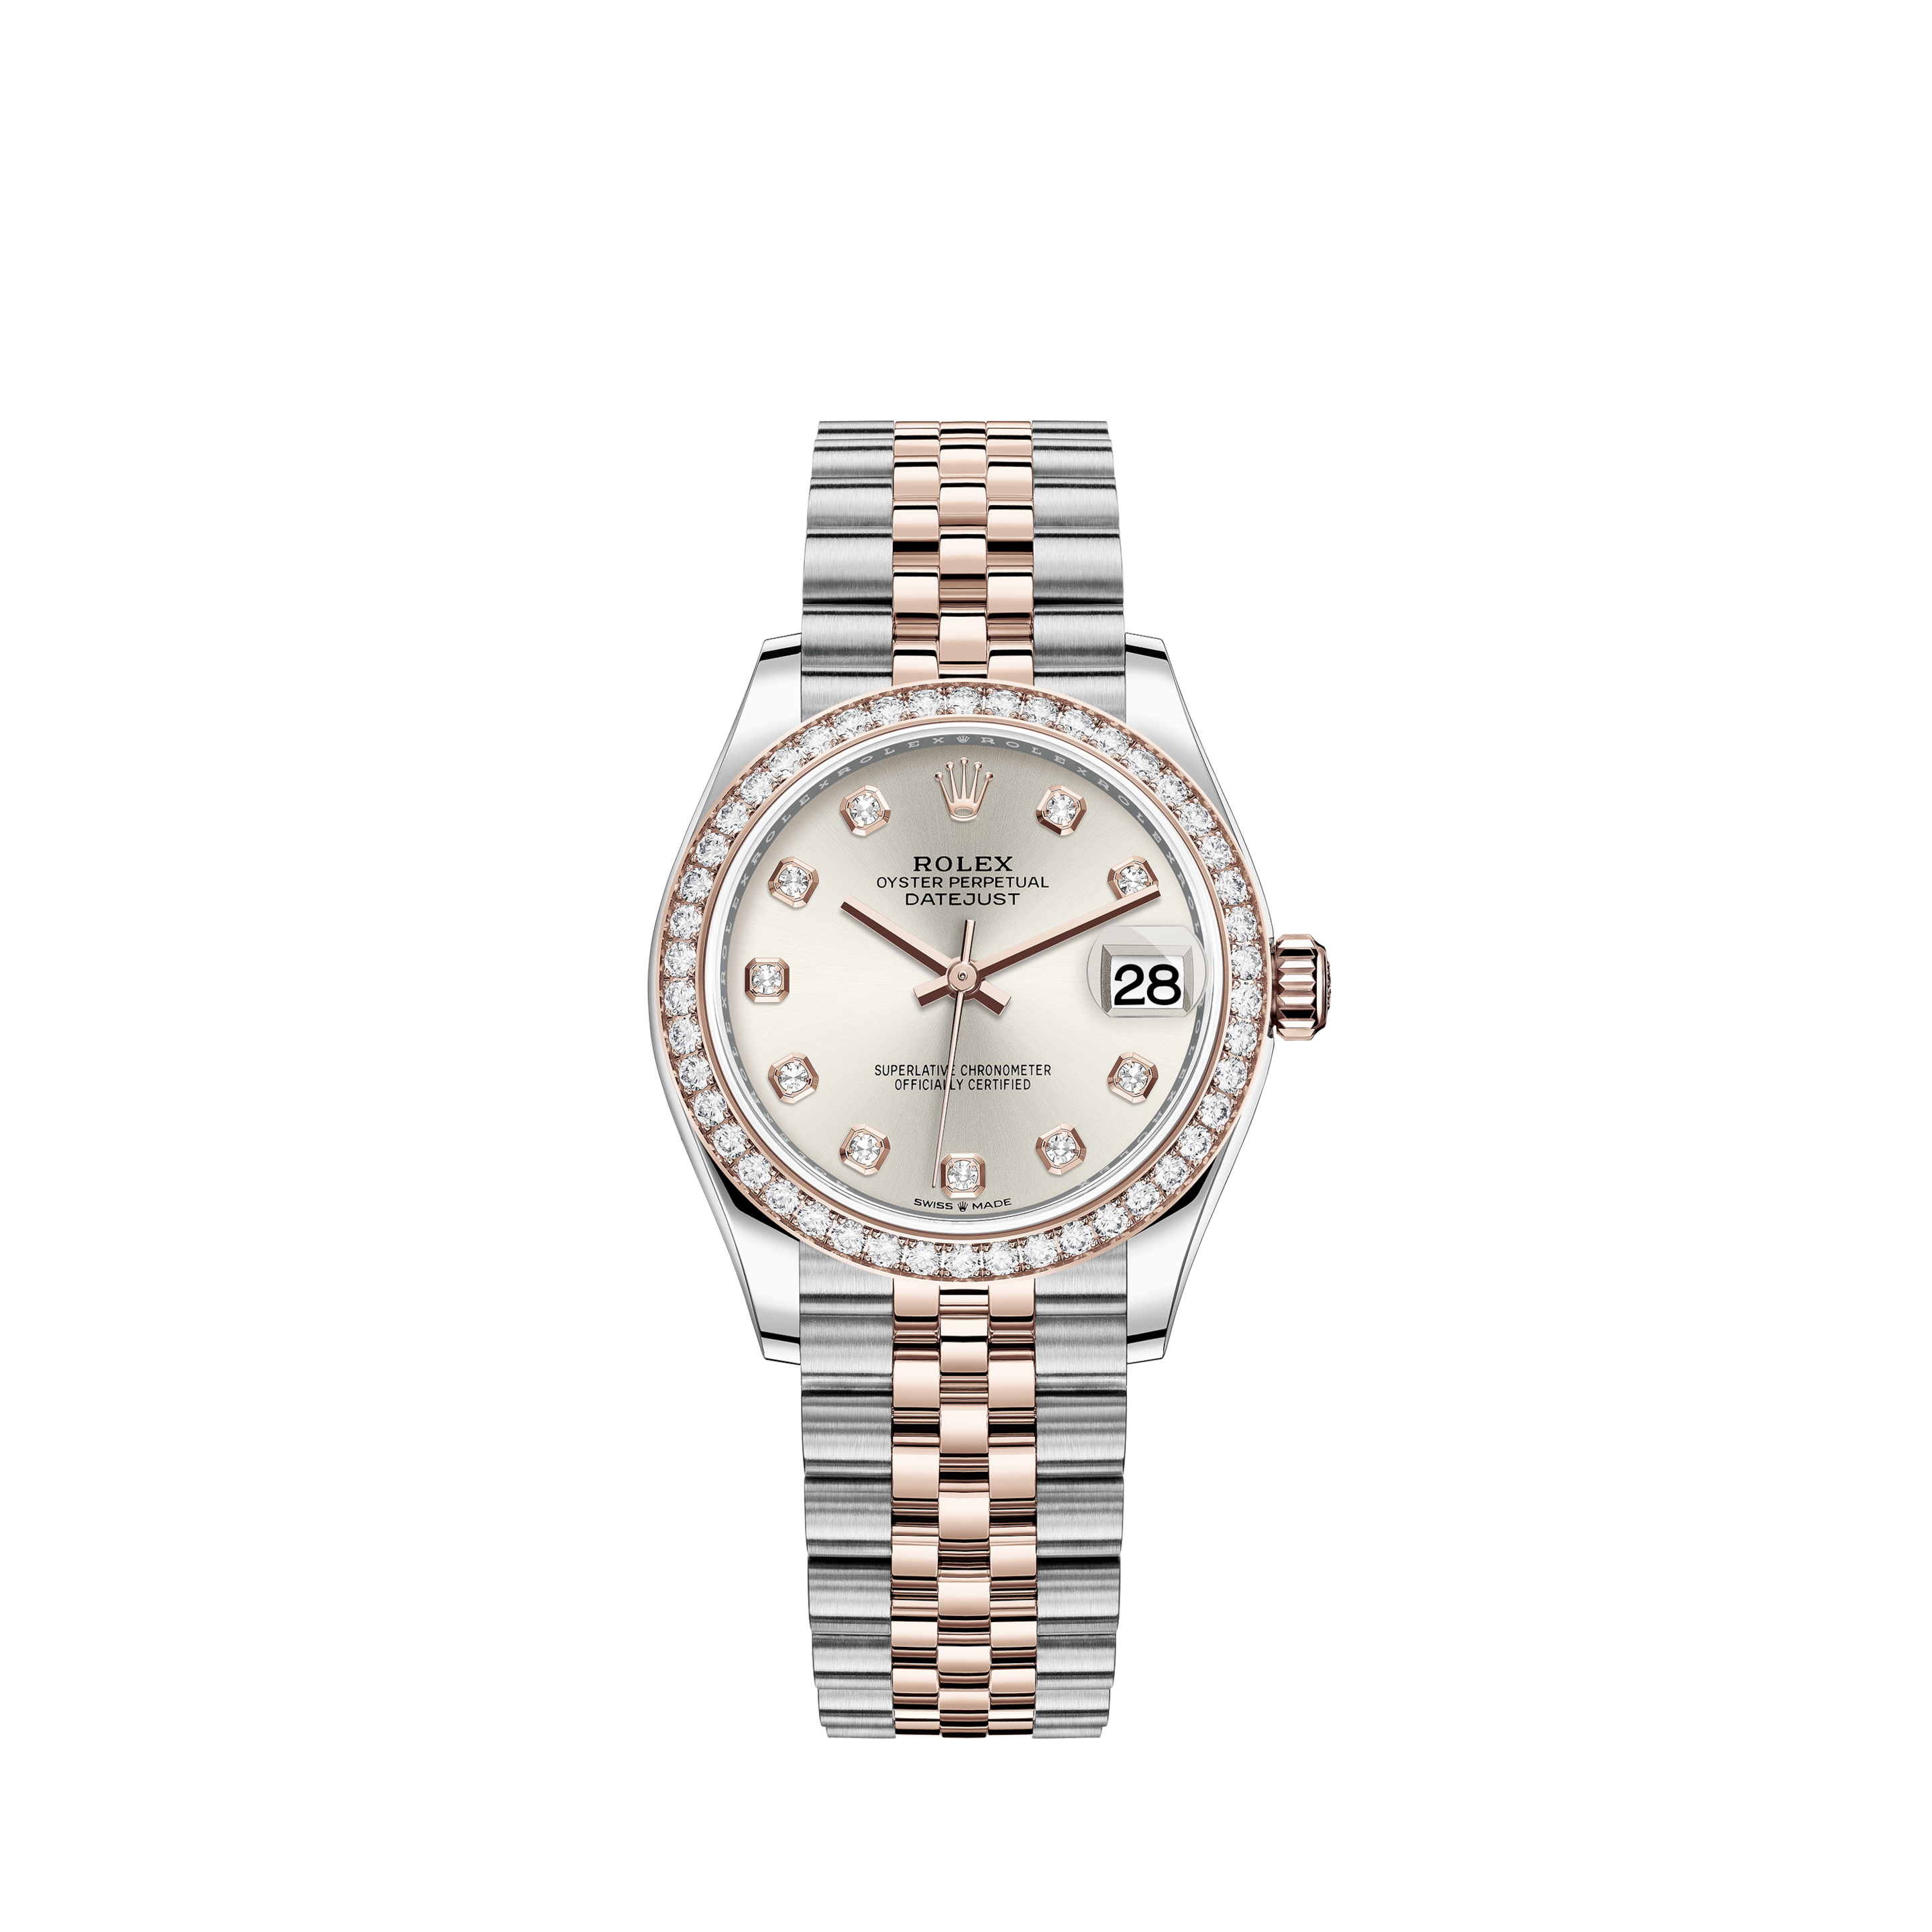 Rolex DateJust 116201 Stainless Steel & 18k Rose Gold White Roman Dial